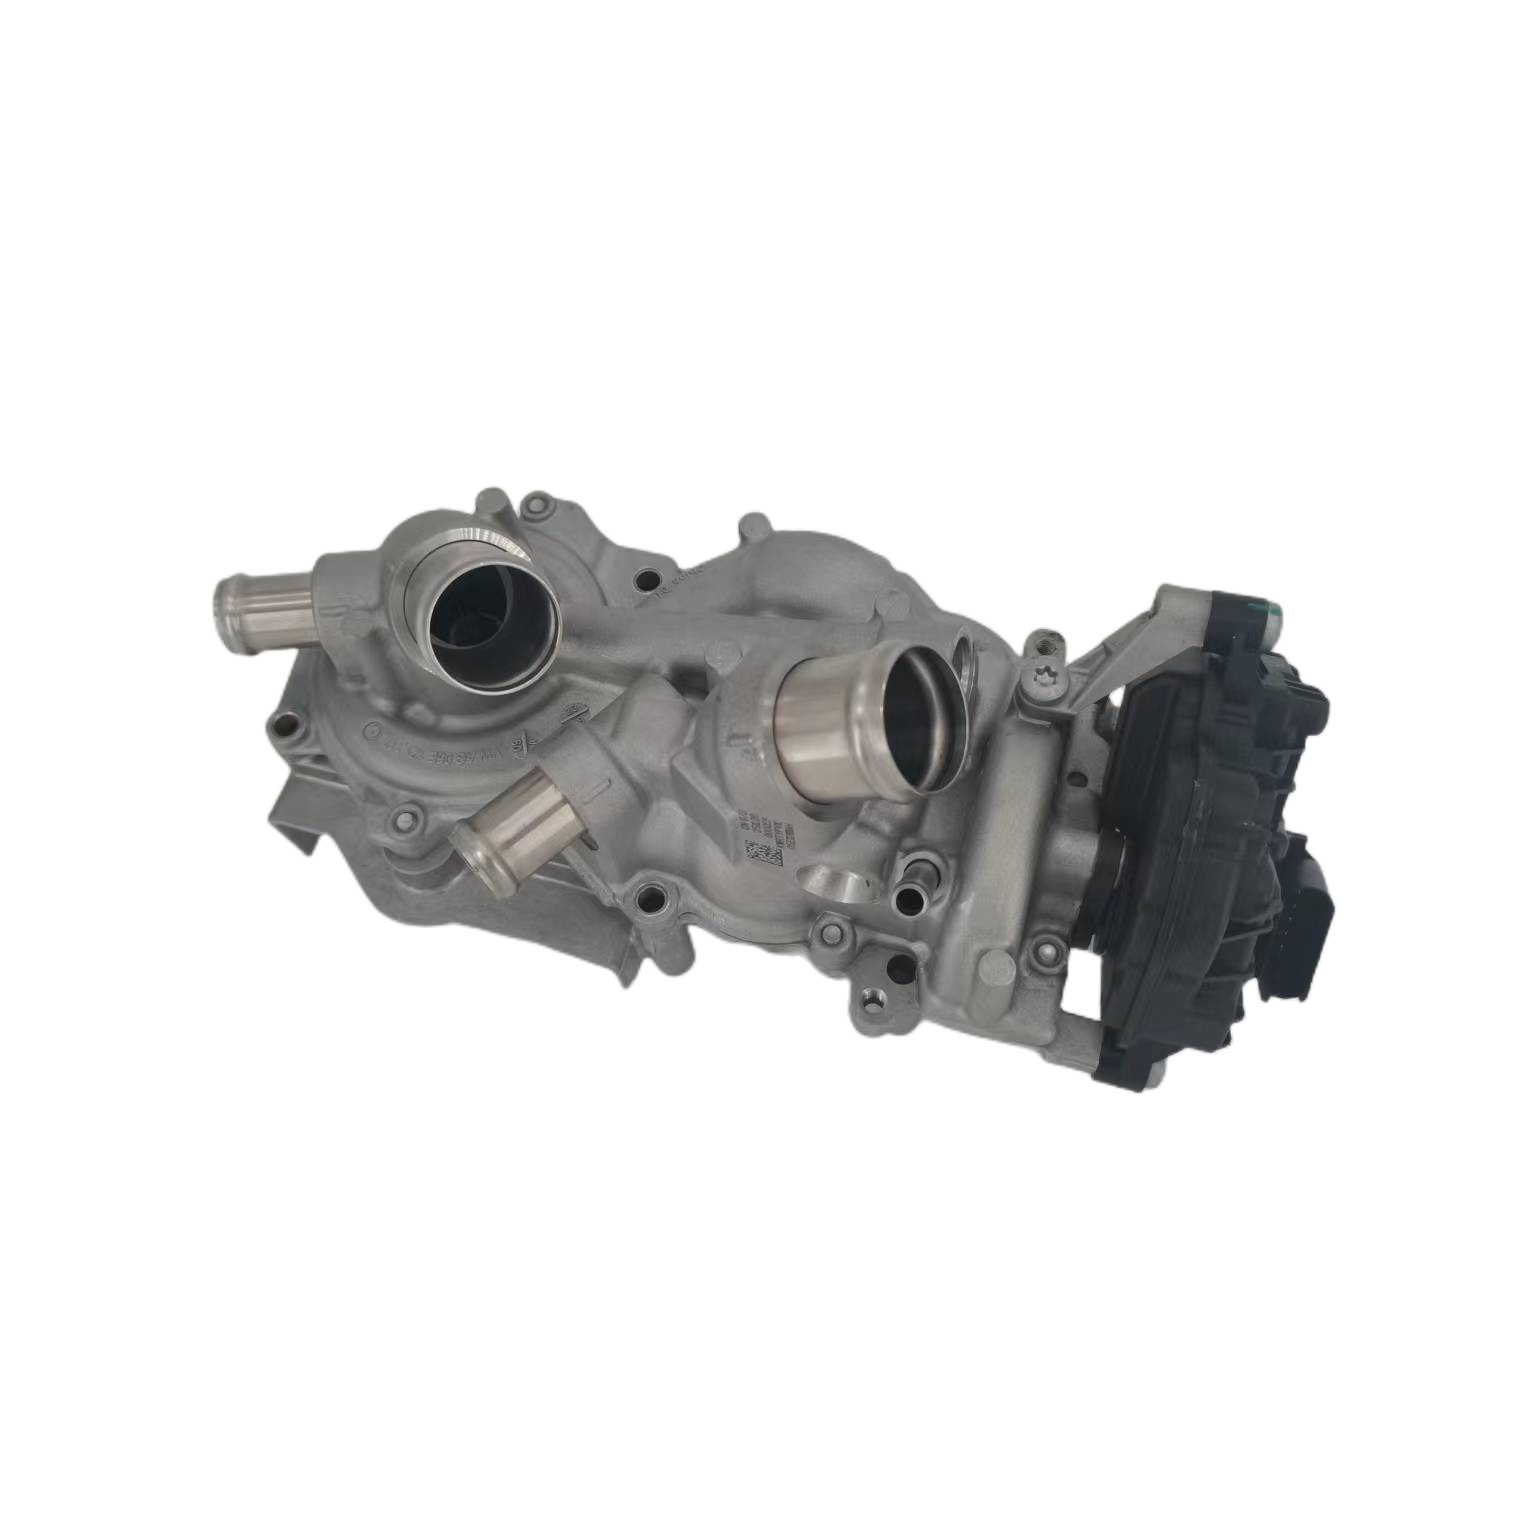 New Auto parts engine cooling system water pump 05E121117 for the latest model of VW Golf Jetta